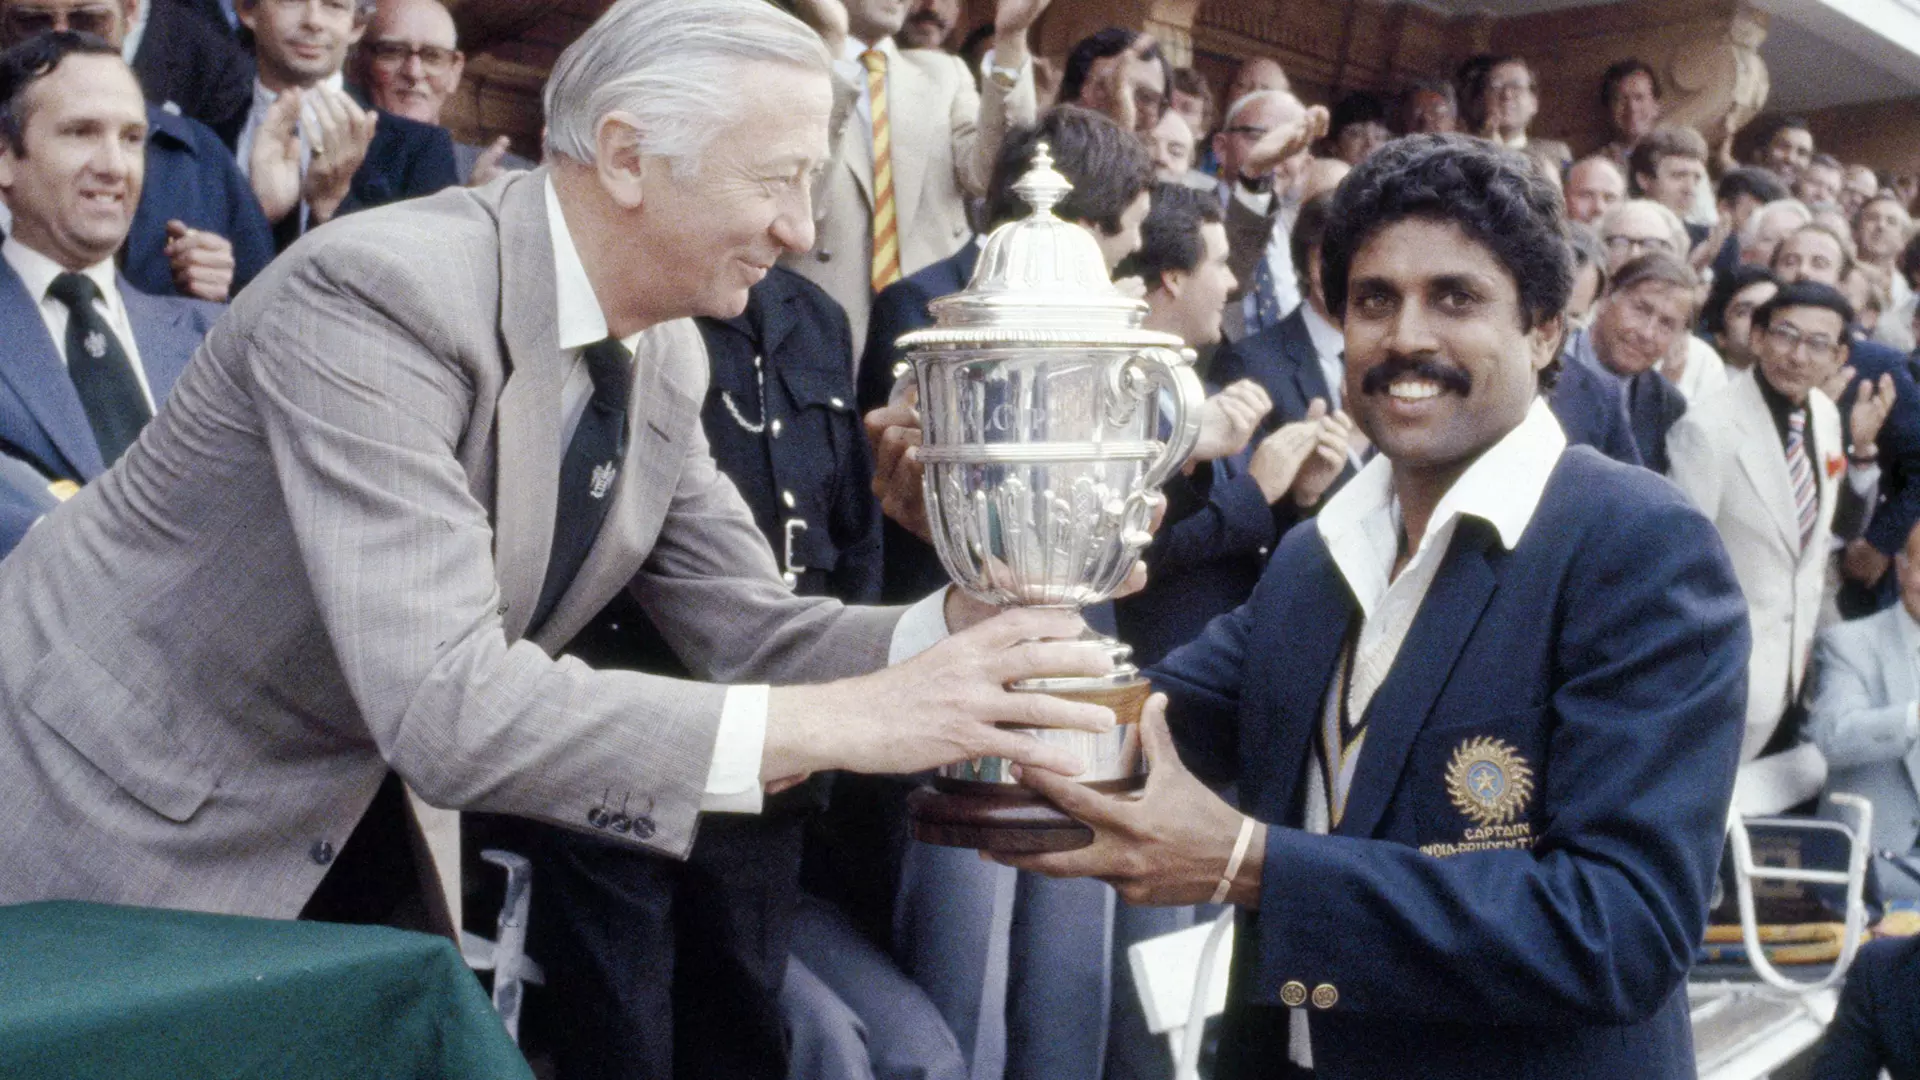 India’s epochal victory in the 1983 World Cup and the subsequent mushrooming of interest in one-day cricket in the country led to the World Cup moving out of England for the first time, in 1987.